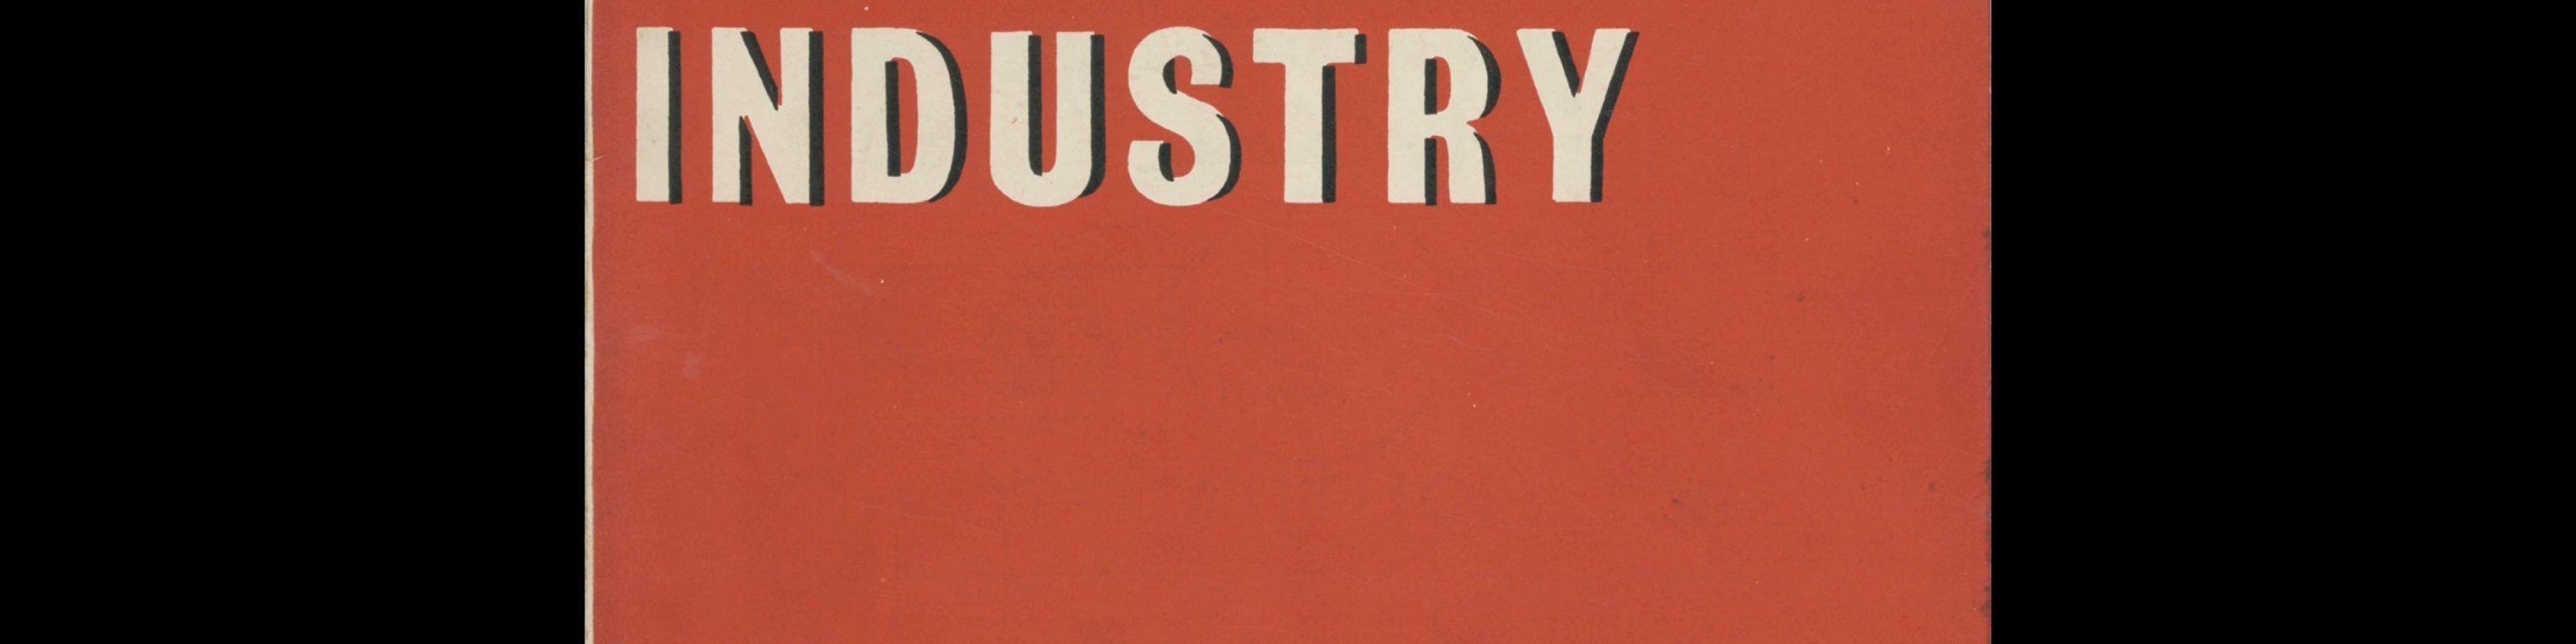 Commercial Art and Industry 108, June 1935